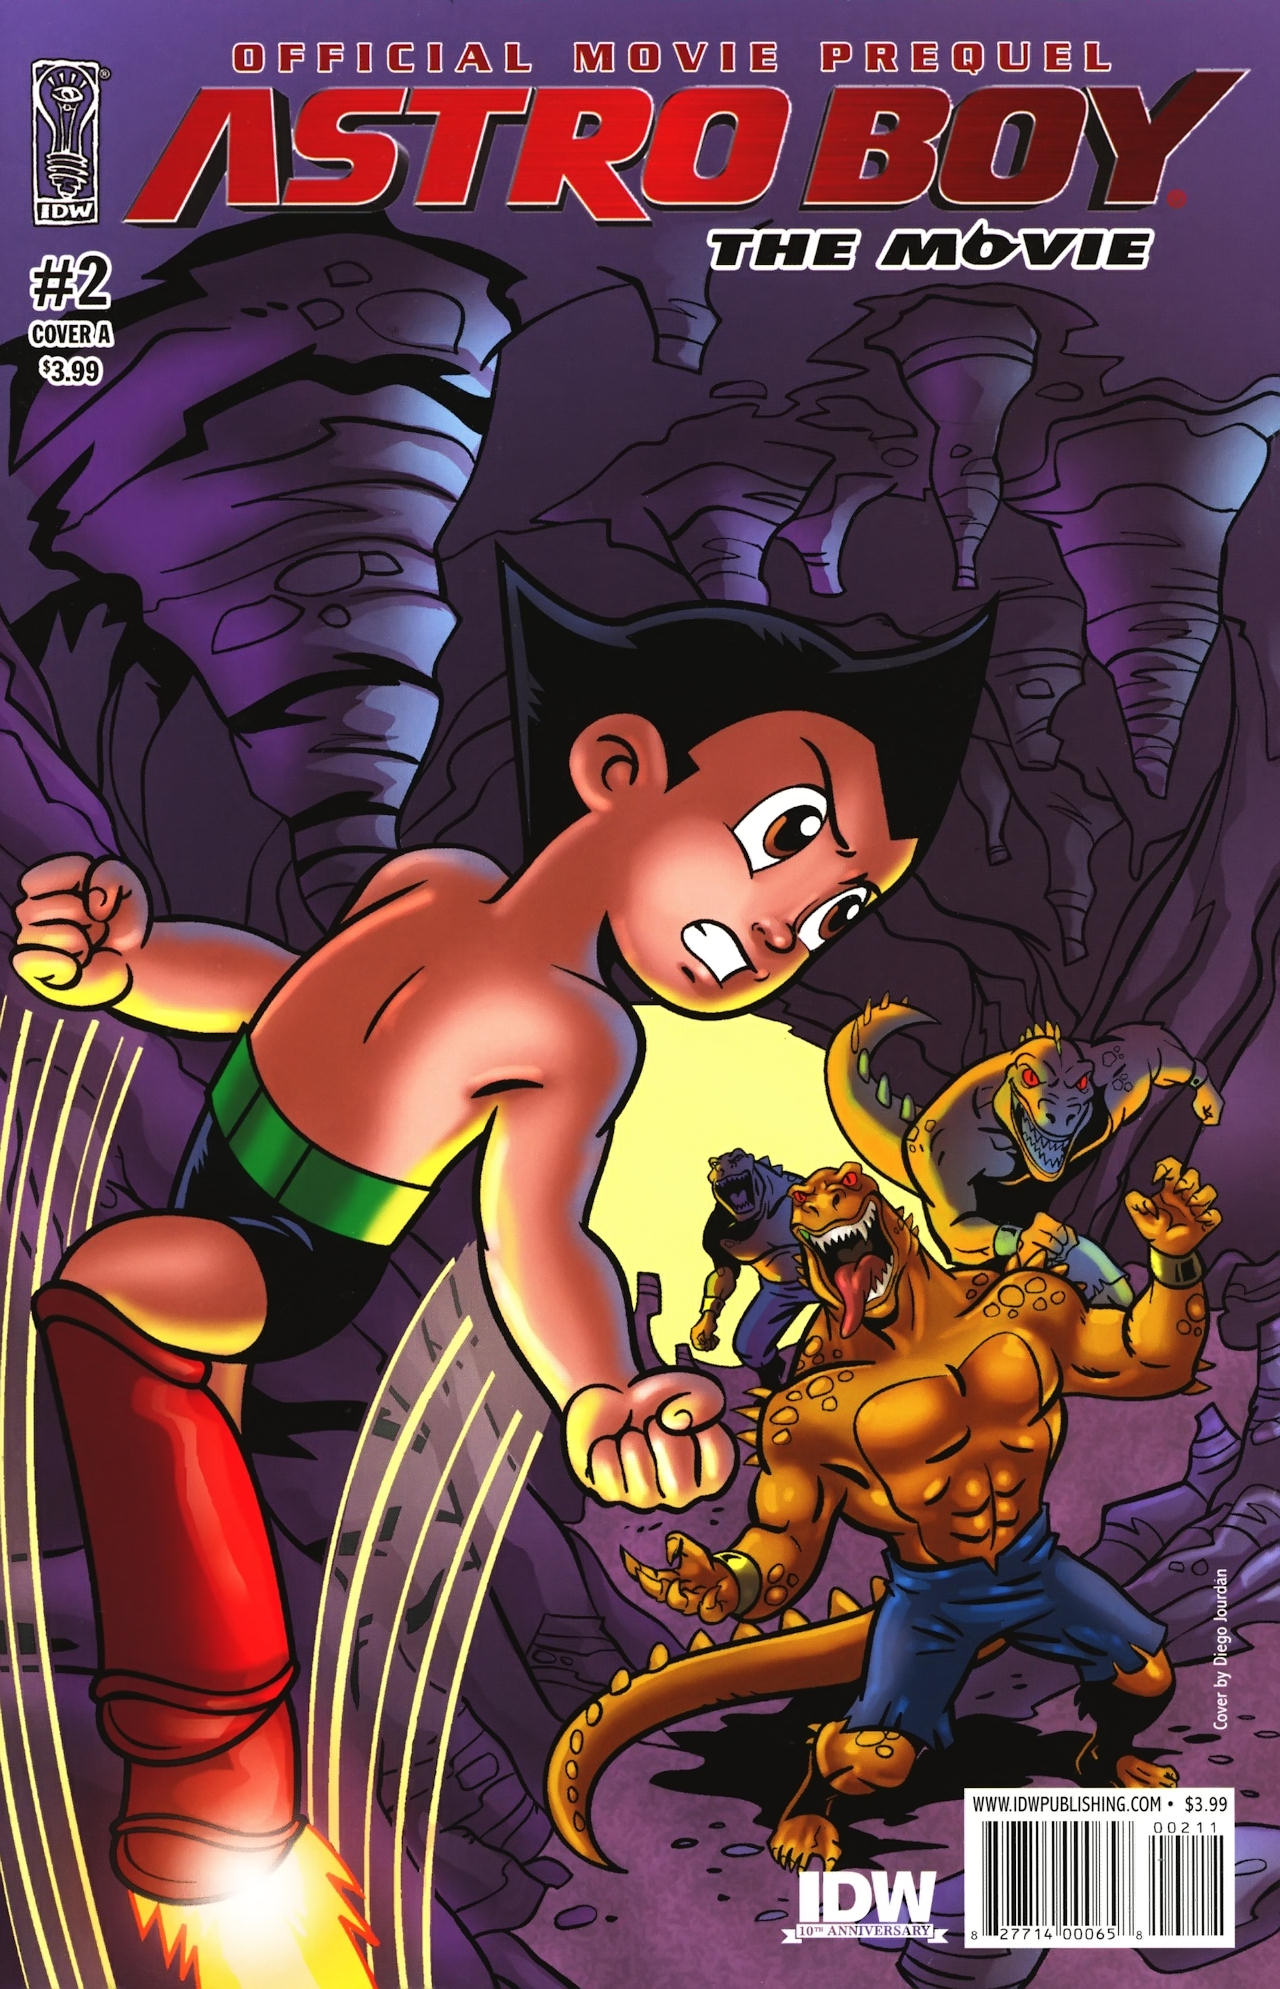 Read online Astro Boy: The Movie: Official Movie Prequel comic -  Issue #2 - 1